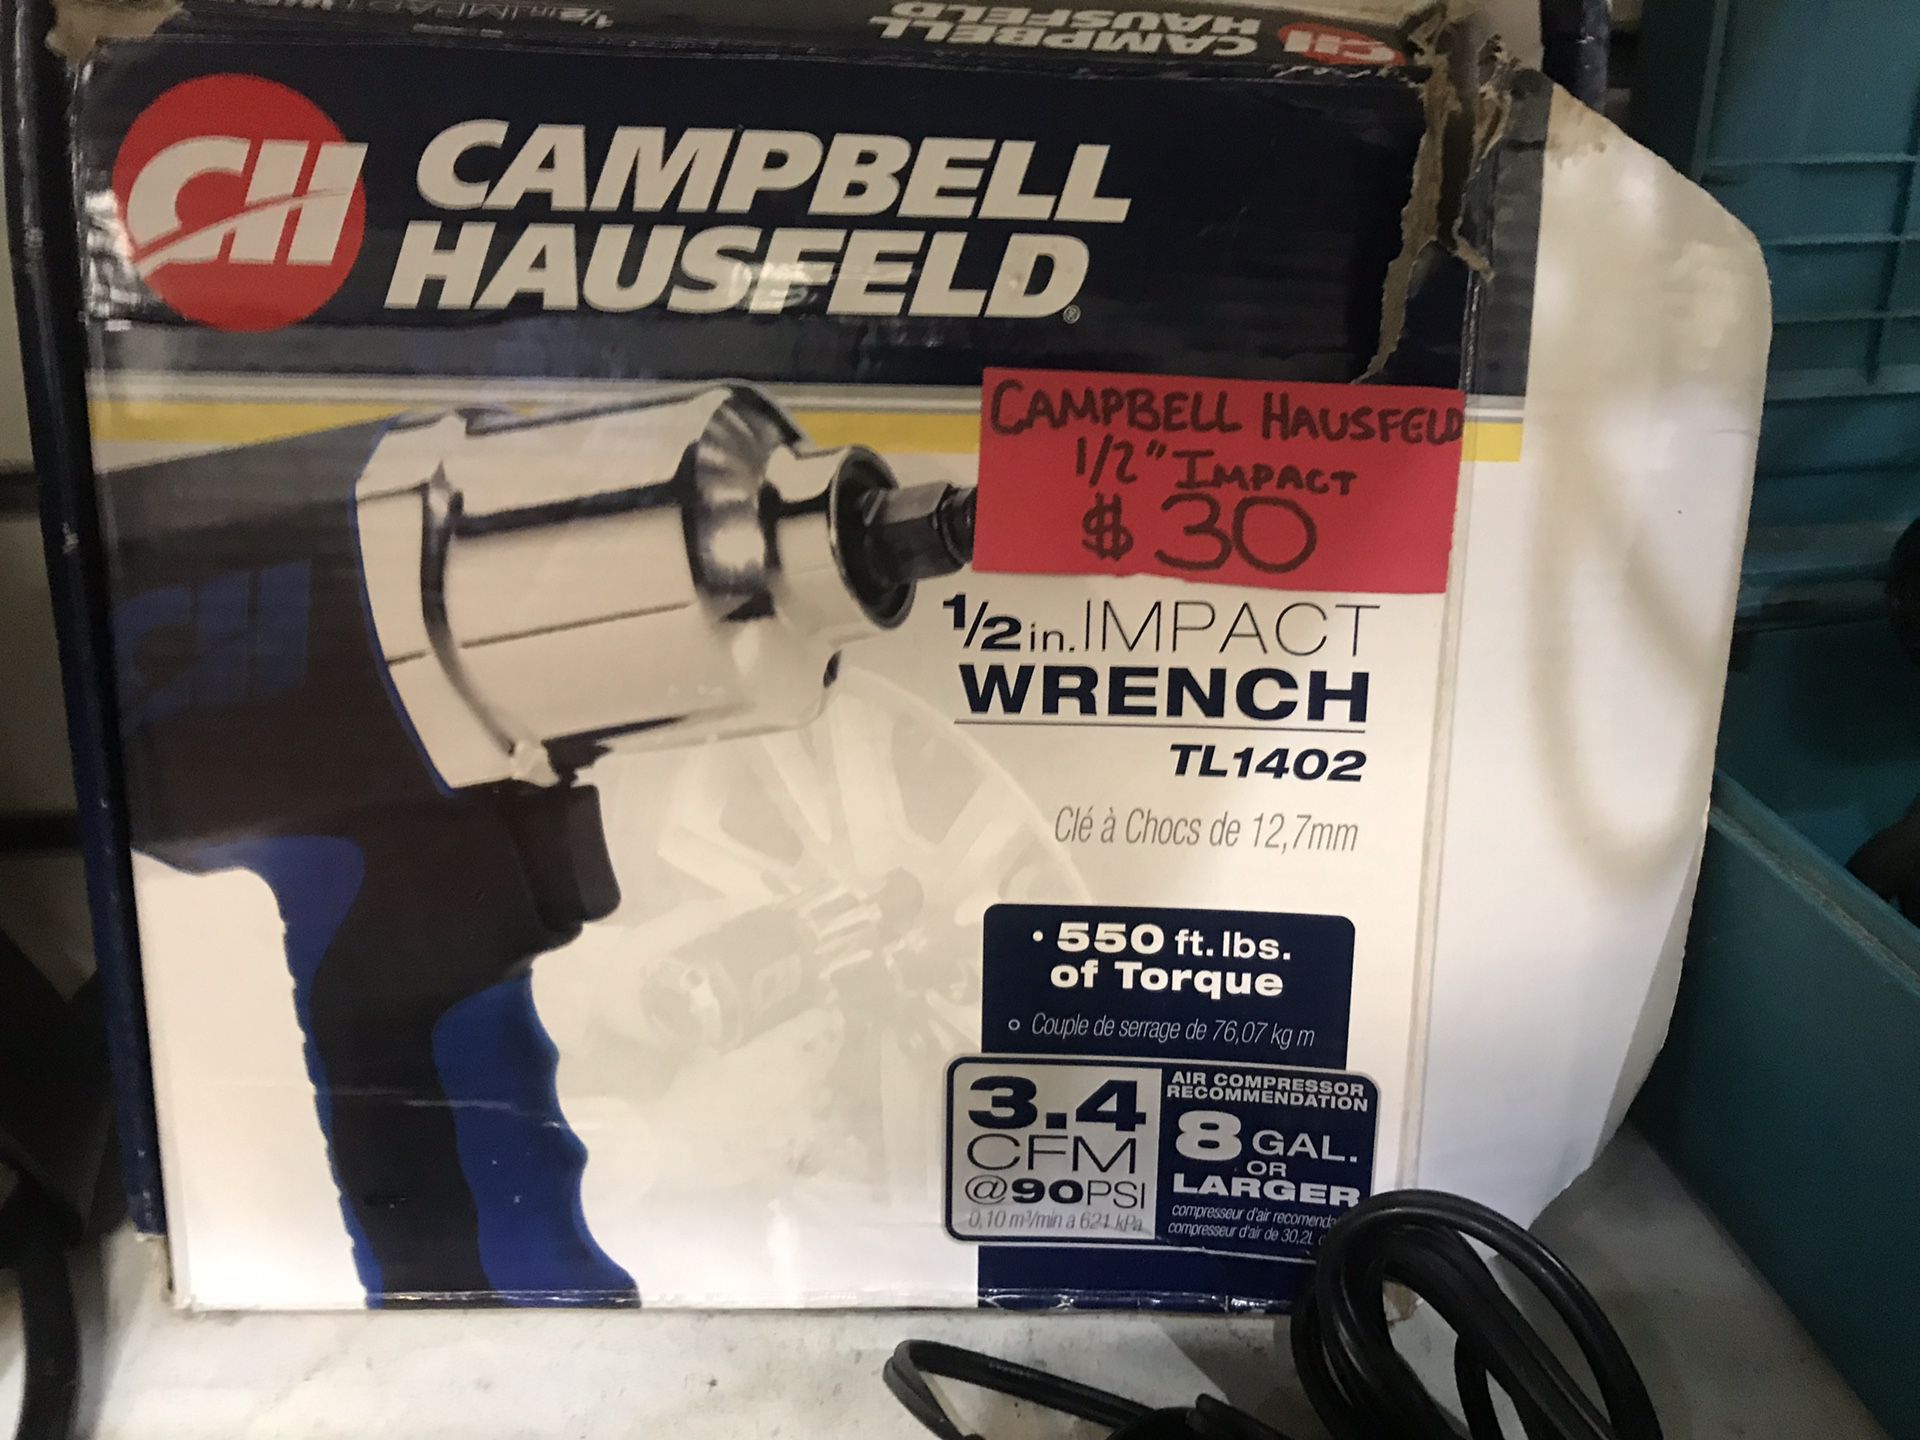 Campbellhausfeld 1/2 impact wrench